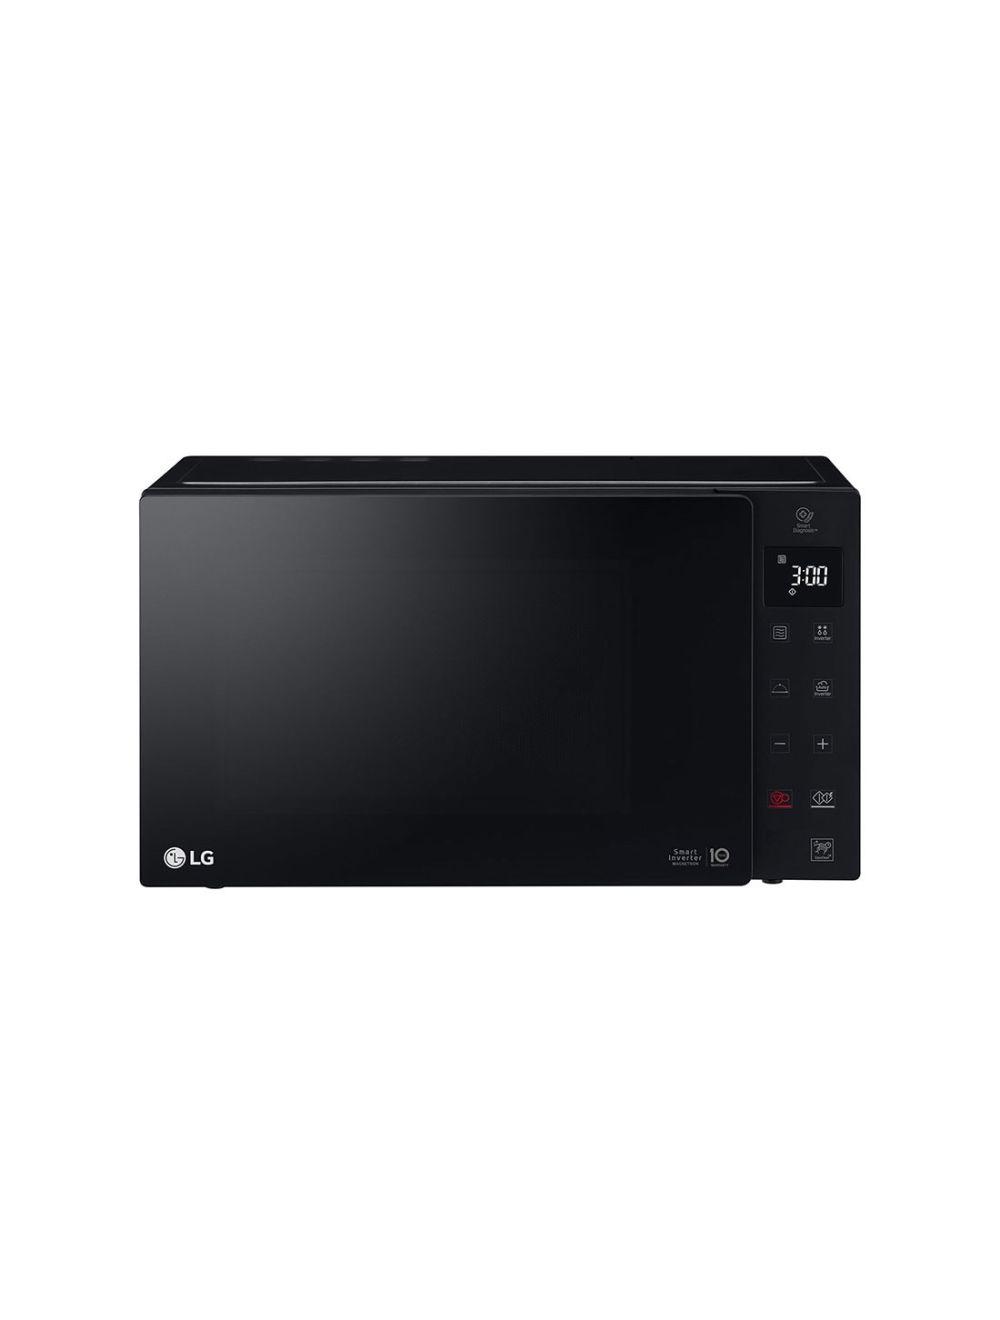 LG 25L SOLO MICROWAVE - MS2535GISW